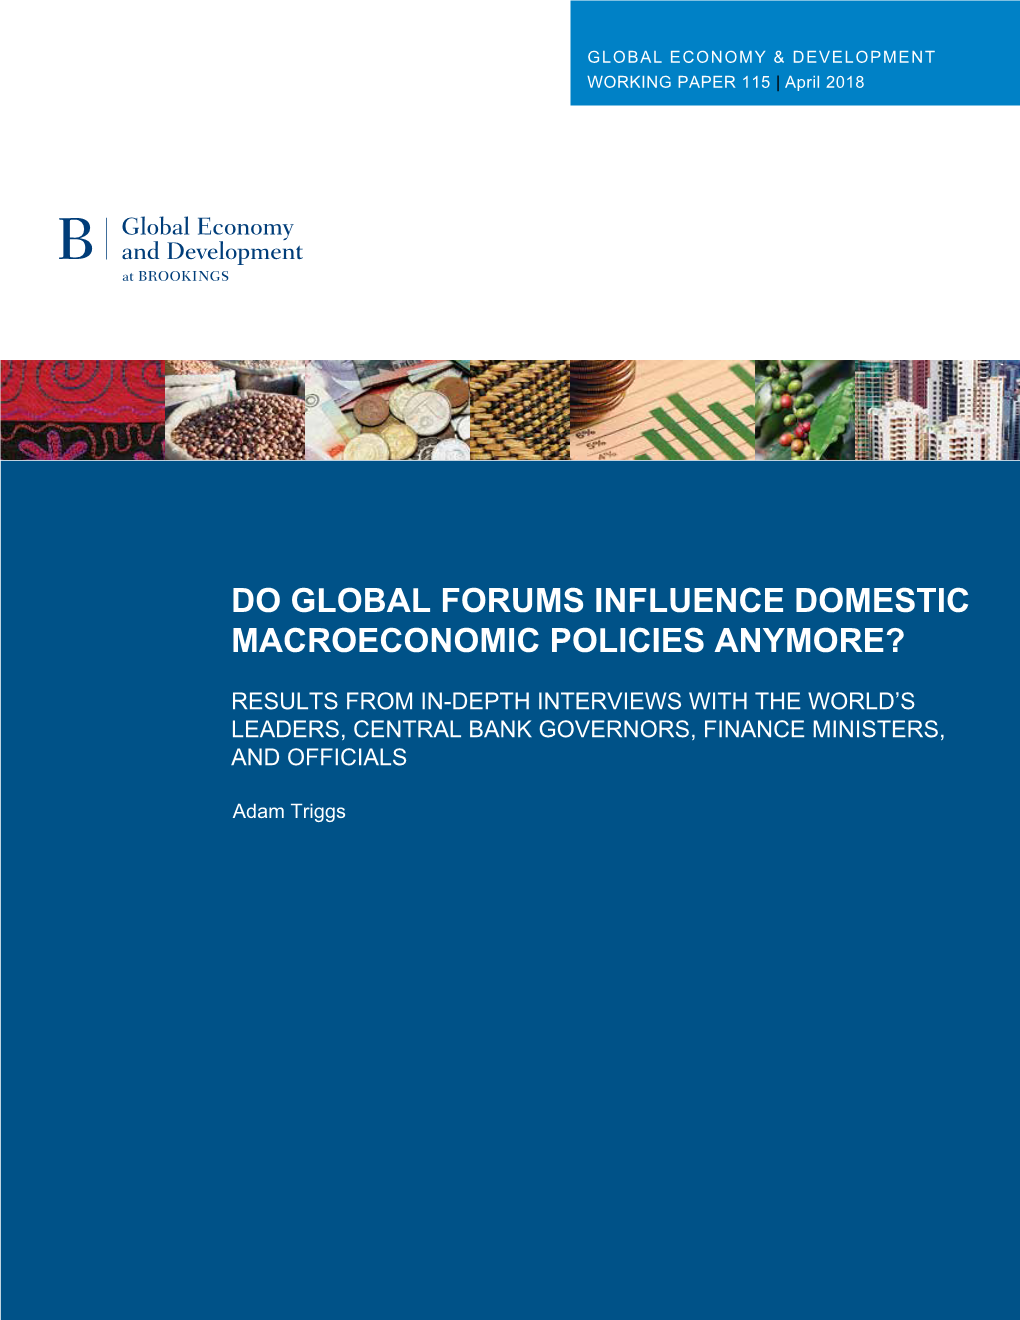 Do Global Forums Influence Domestic Macroeconomic Policies Anymore?